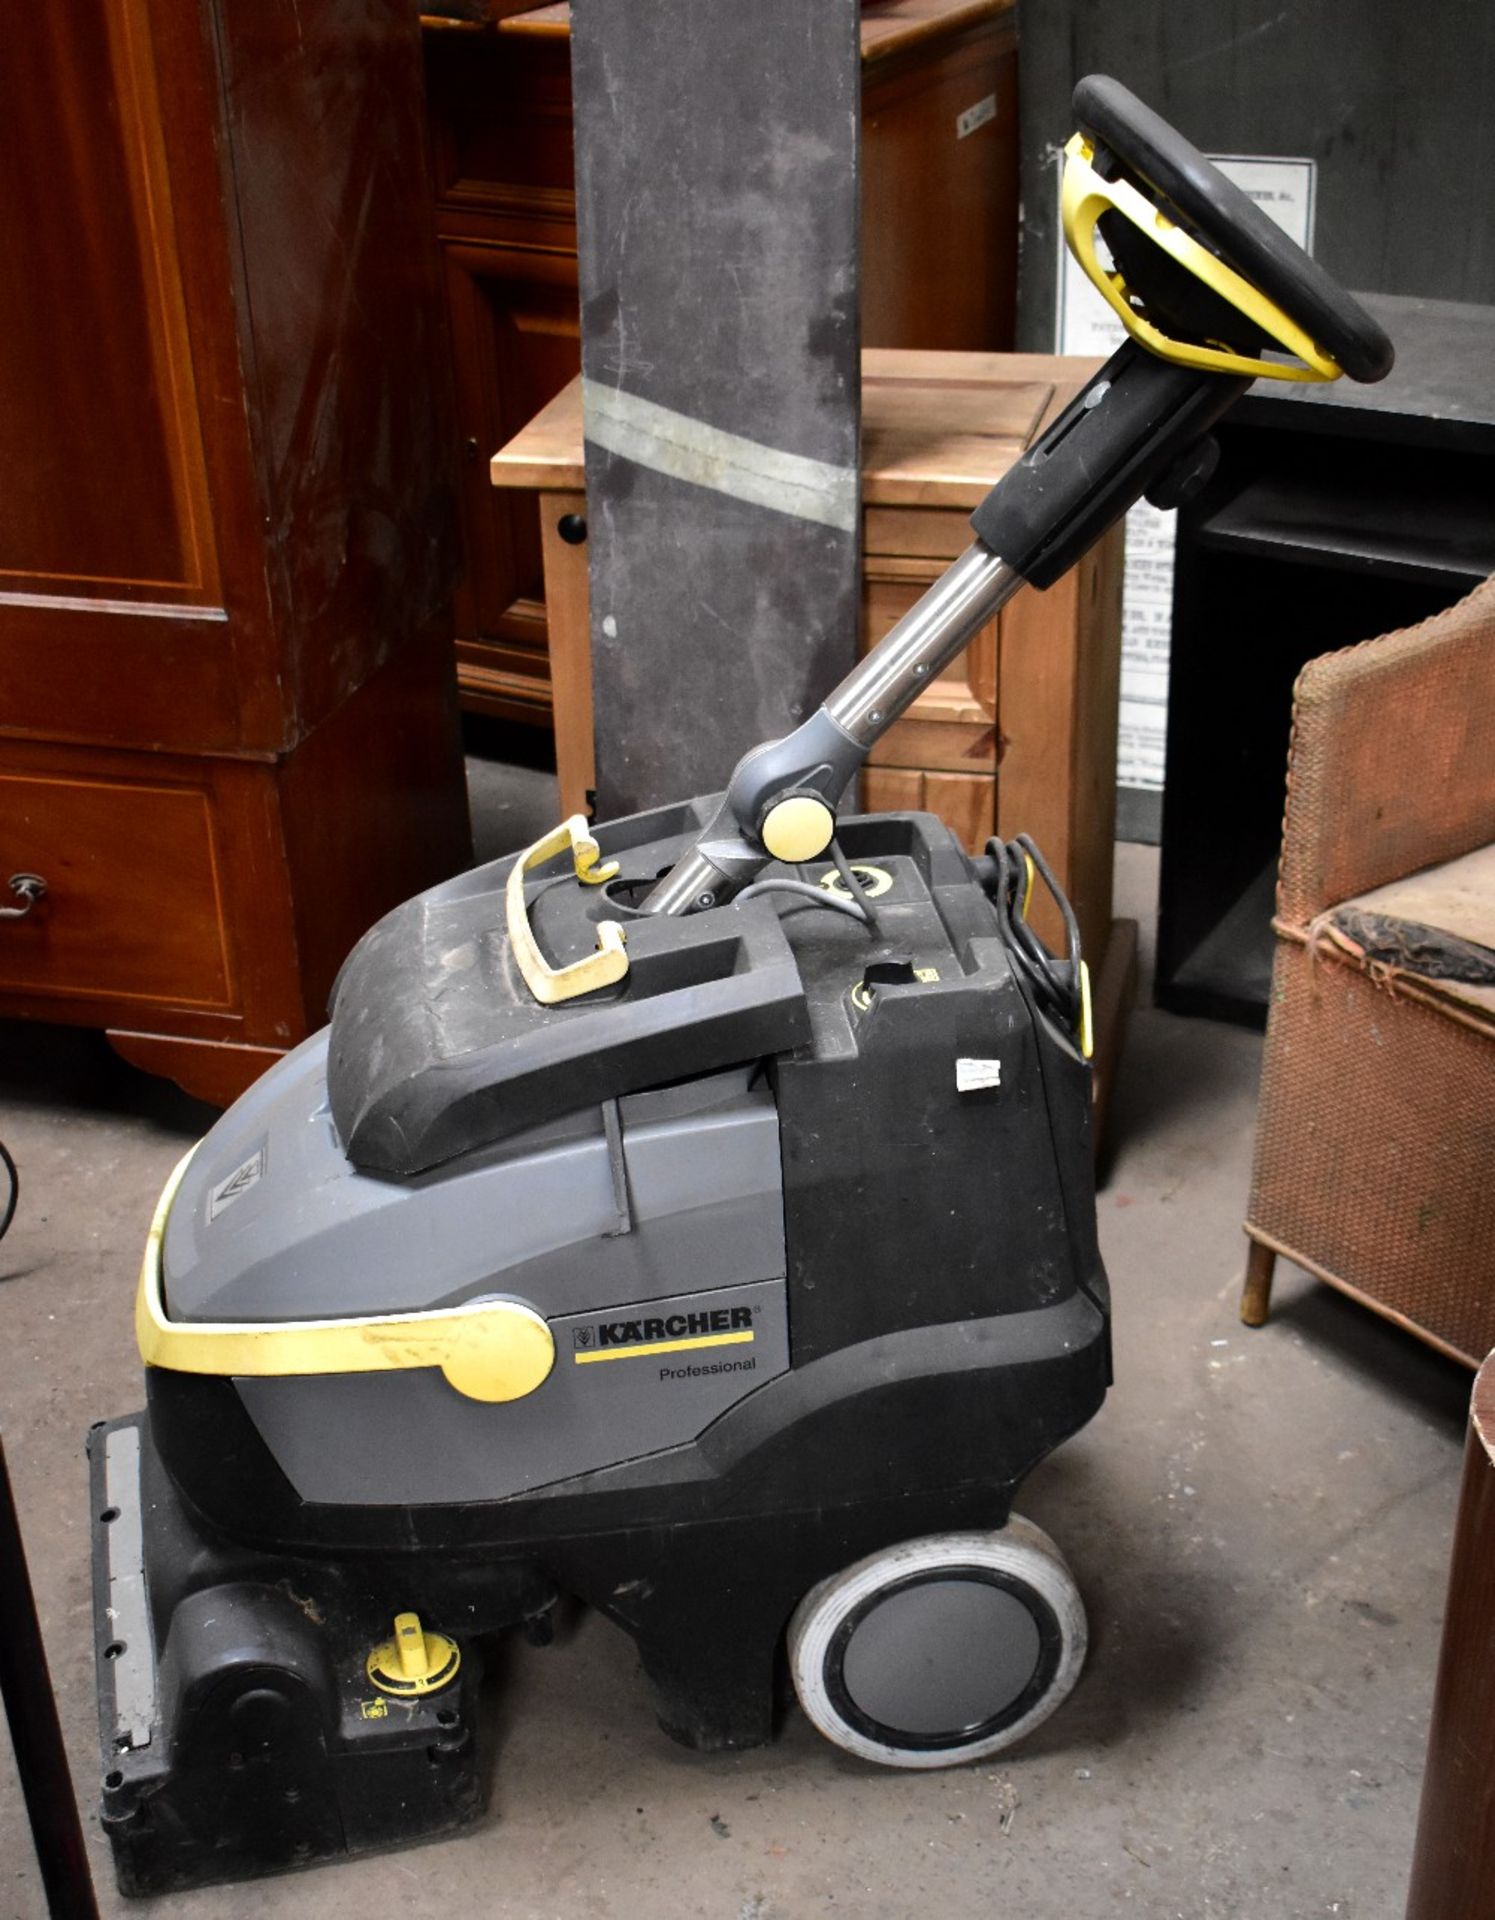 A Karcher Model BR 35/12C professional floor cleaner (sold electrically untested, appears complete).